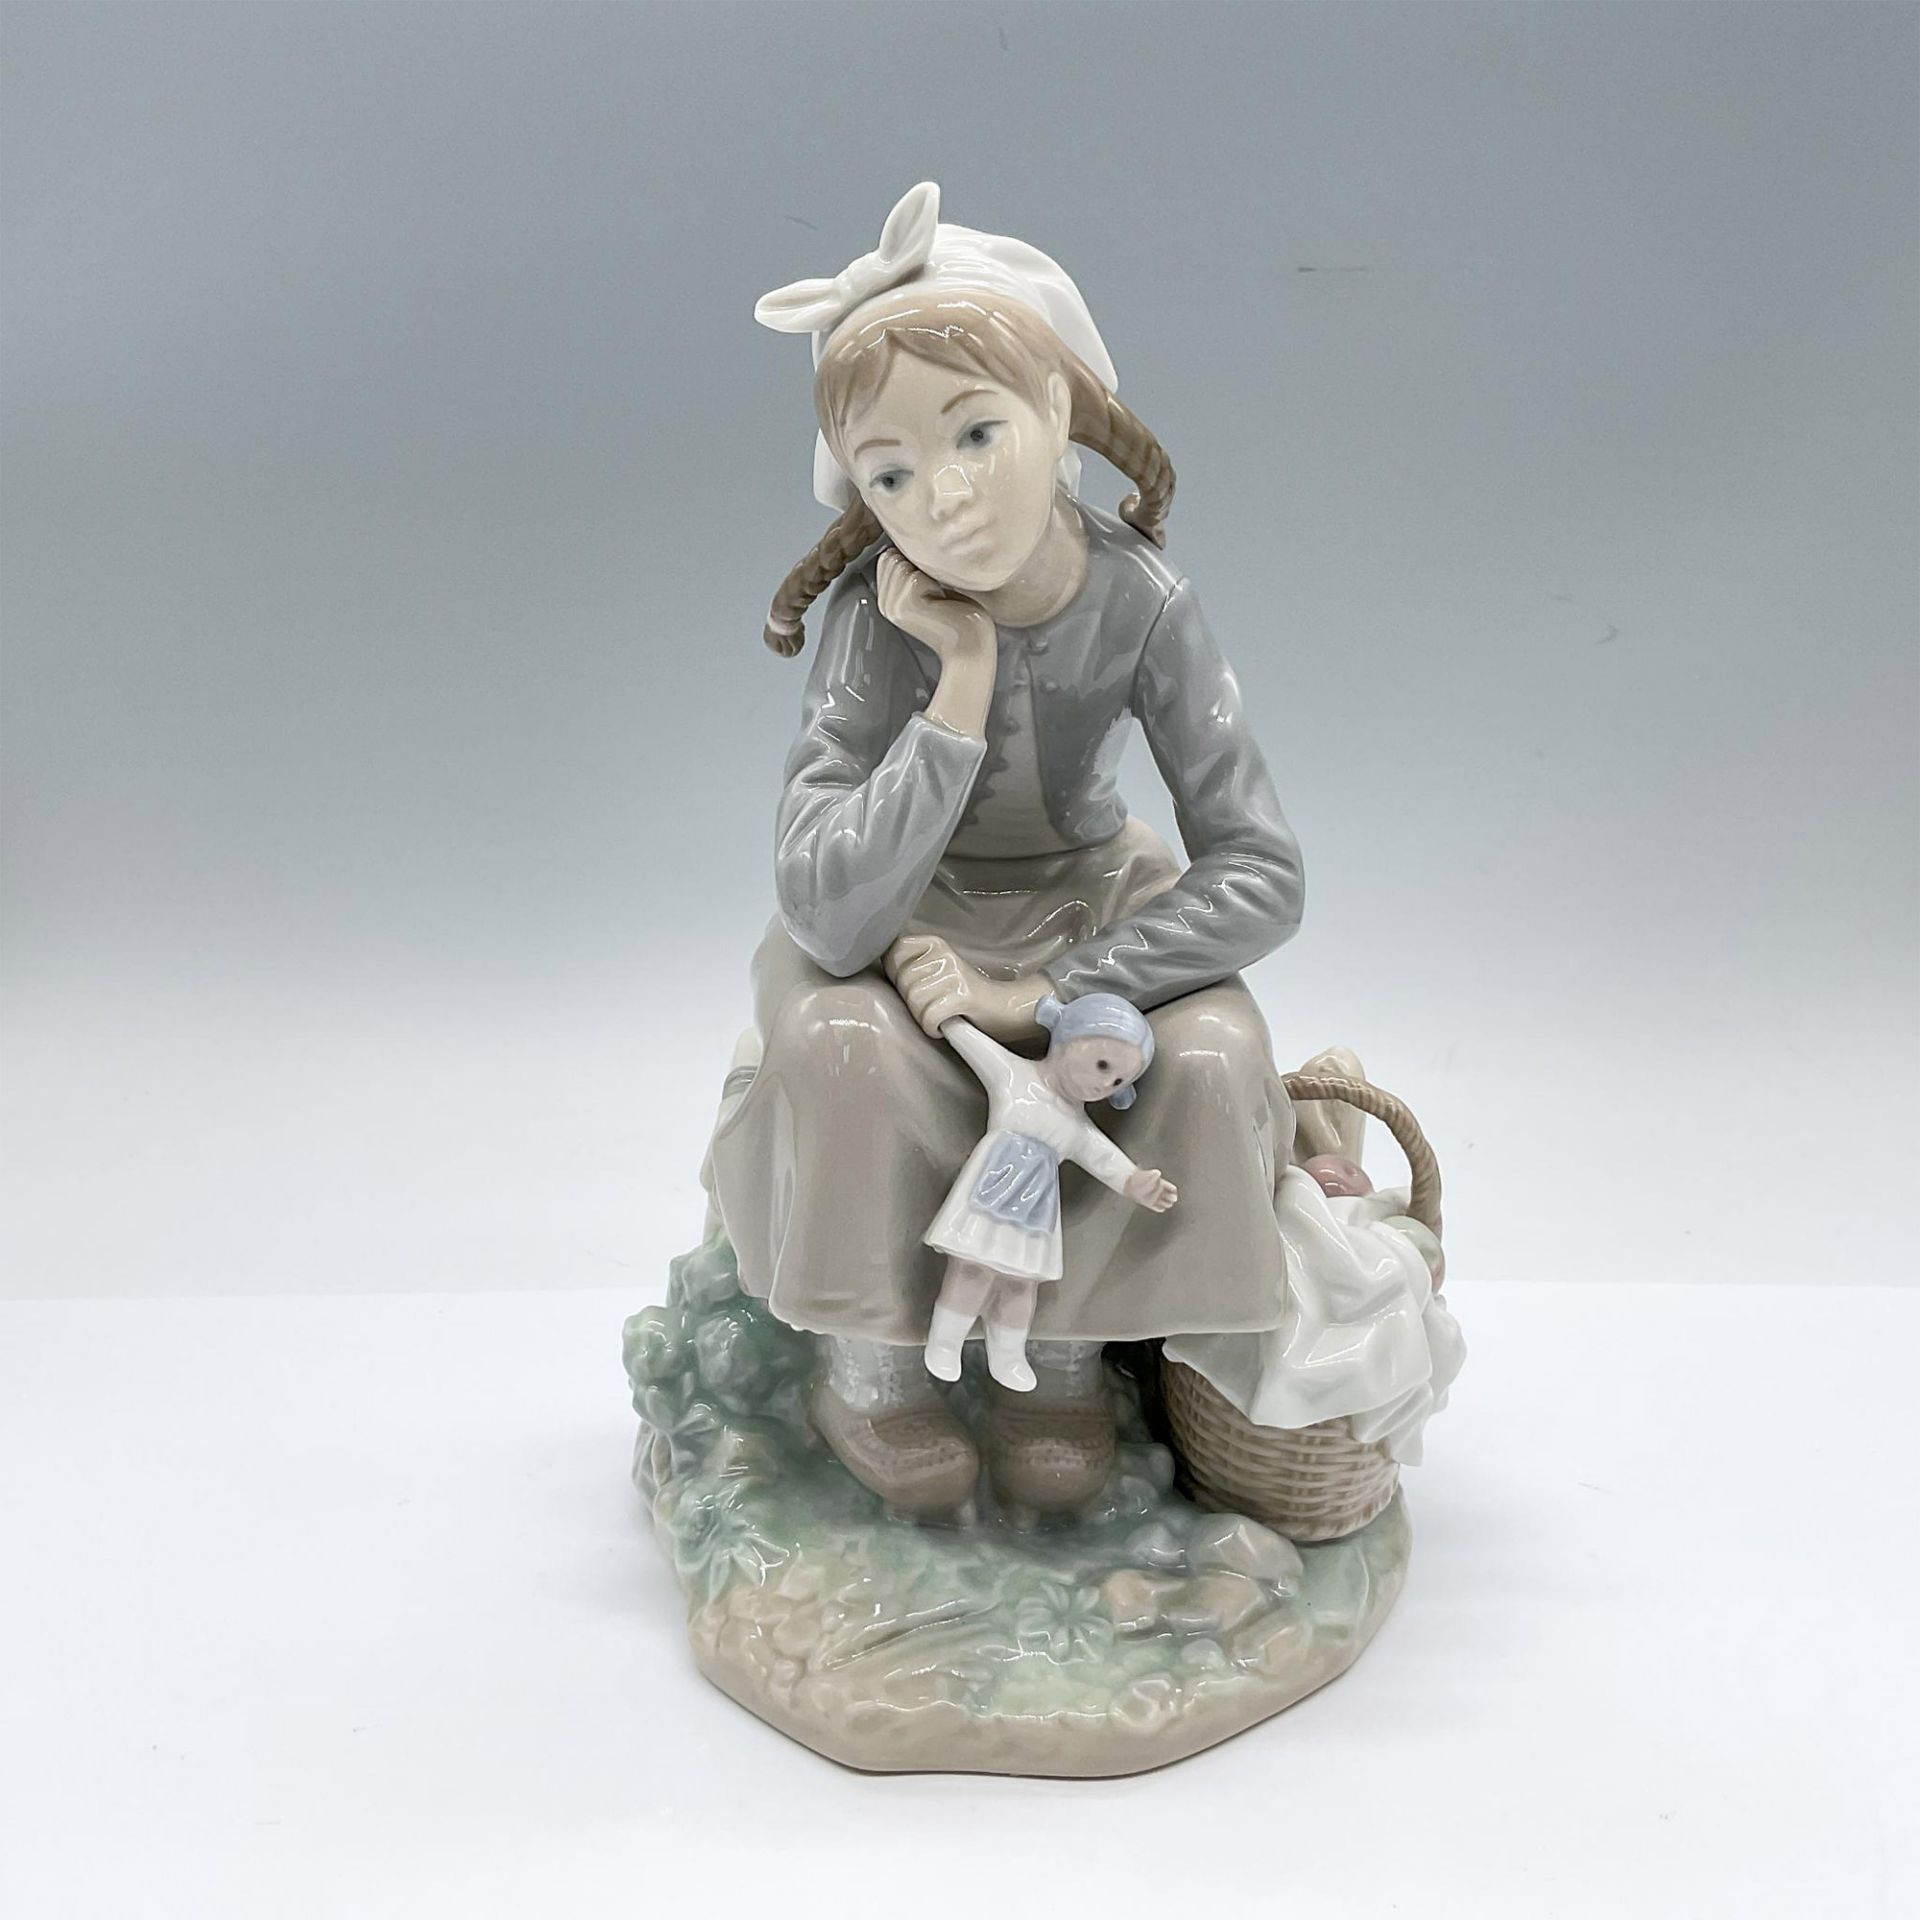 Lladro Porcelain Figurine, Girl With Doll 1001211